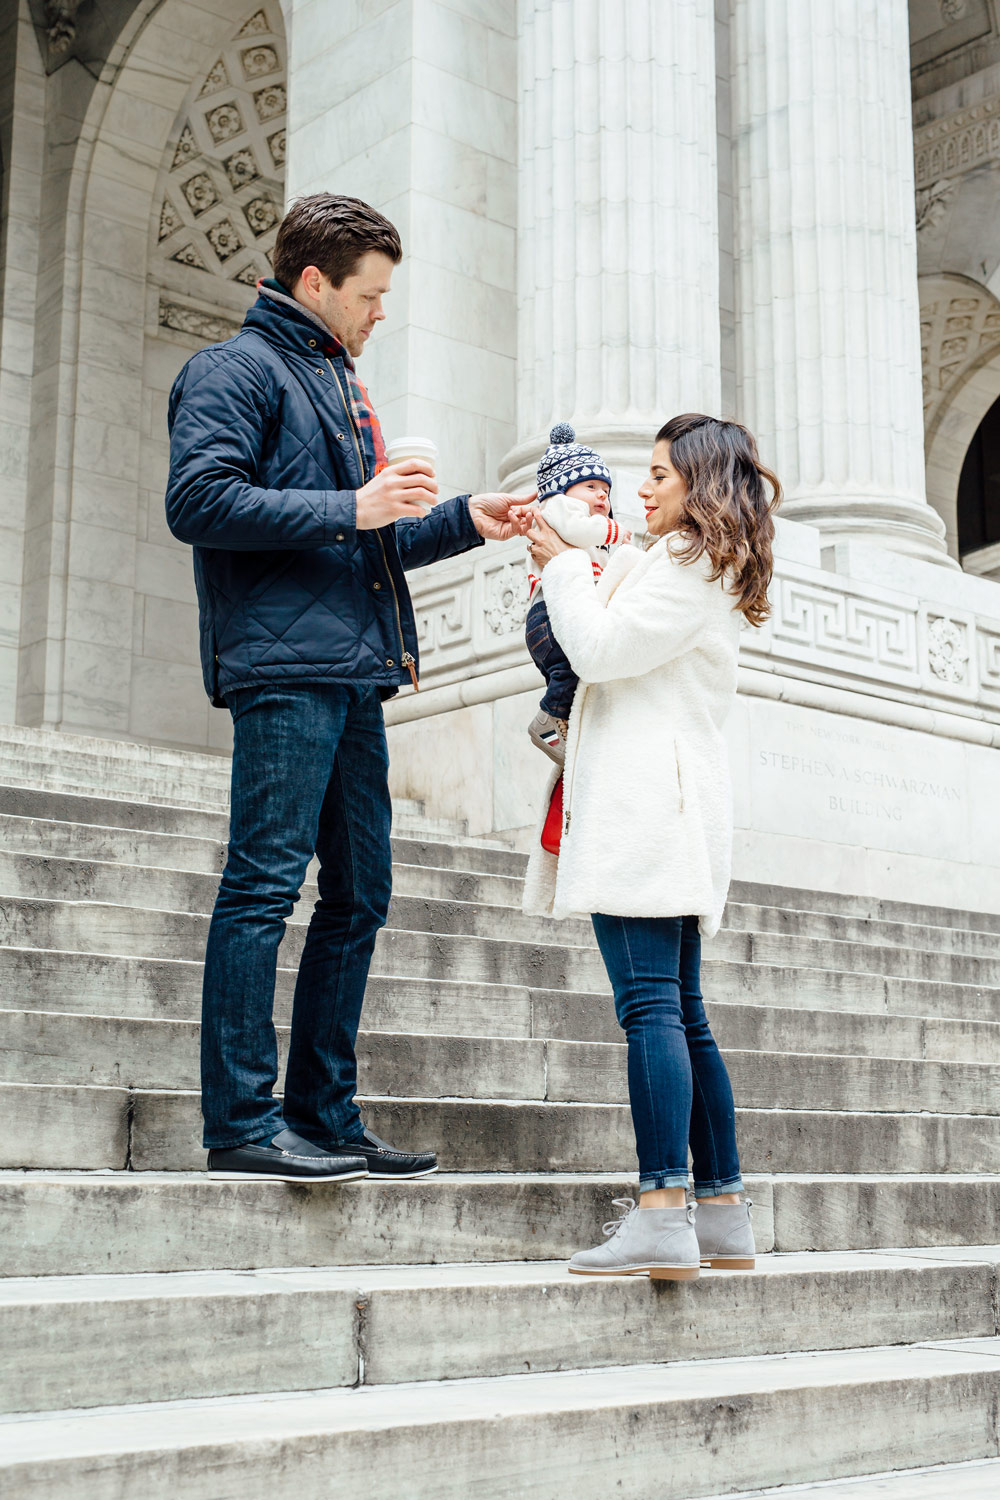 Valentine's Day at New York Public Library